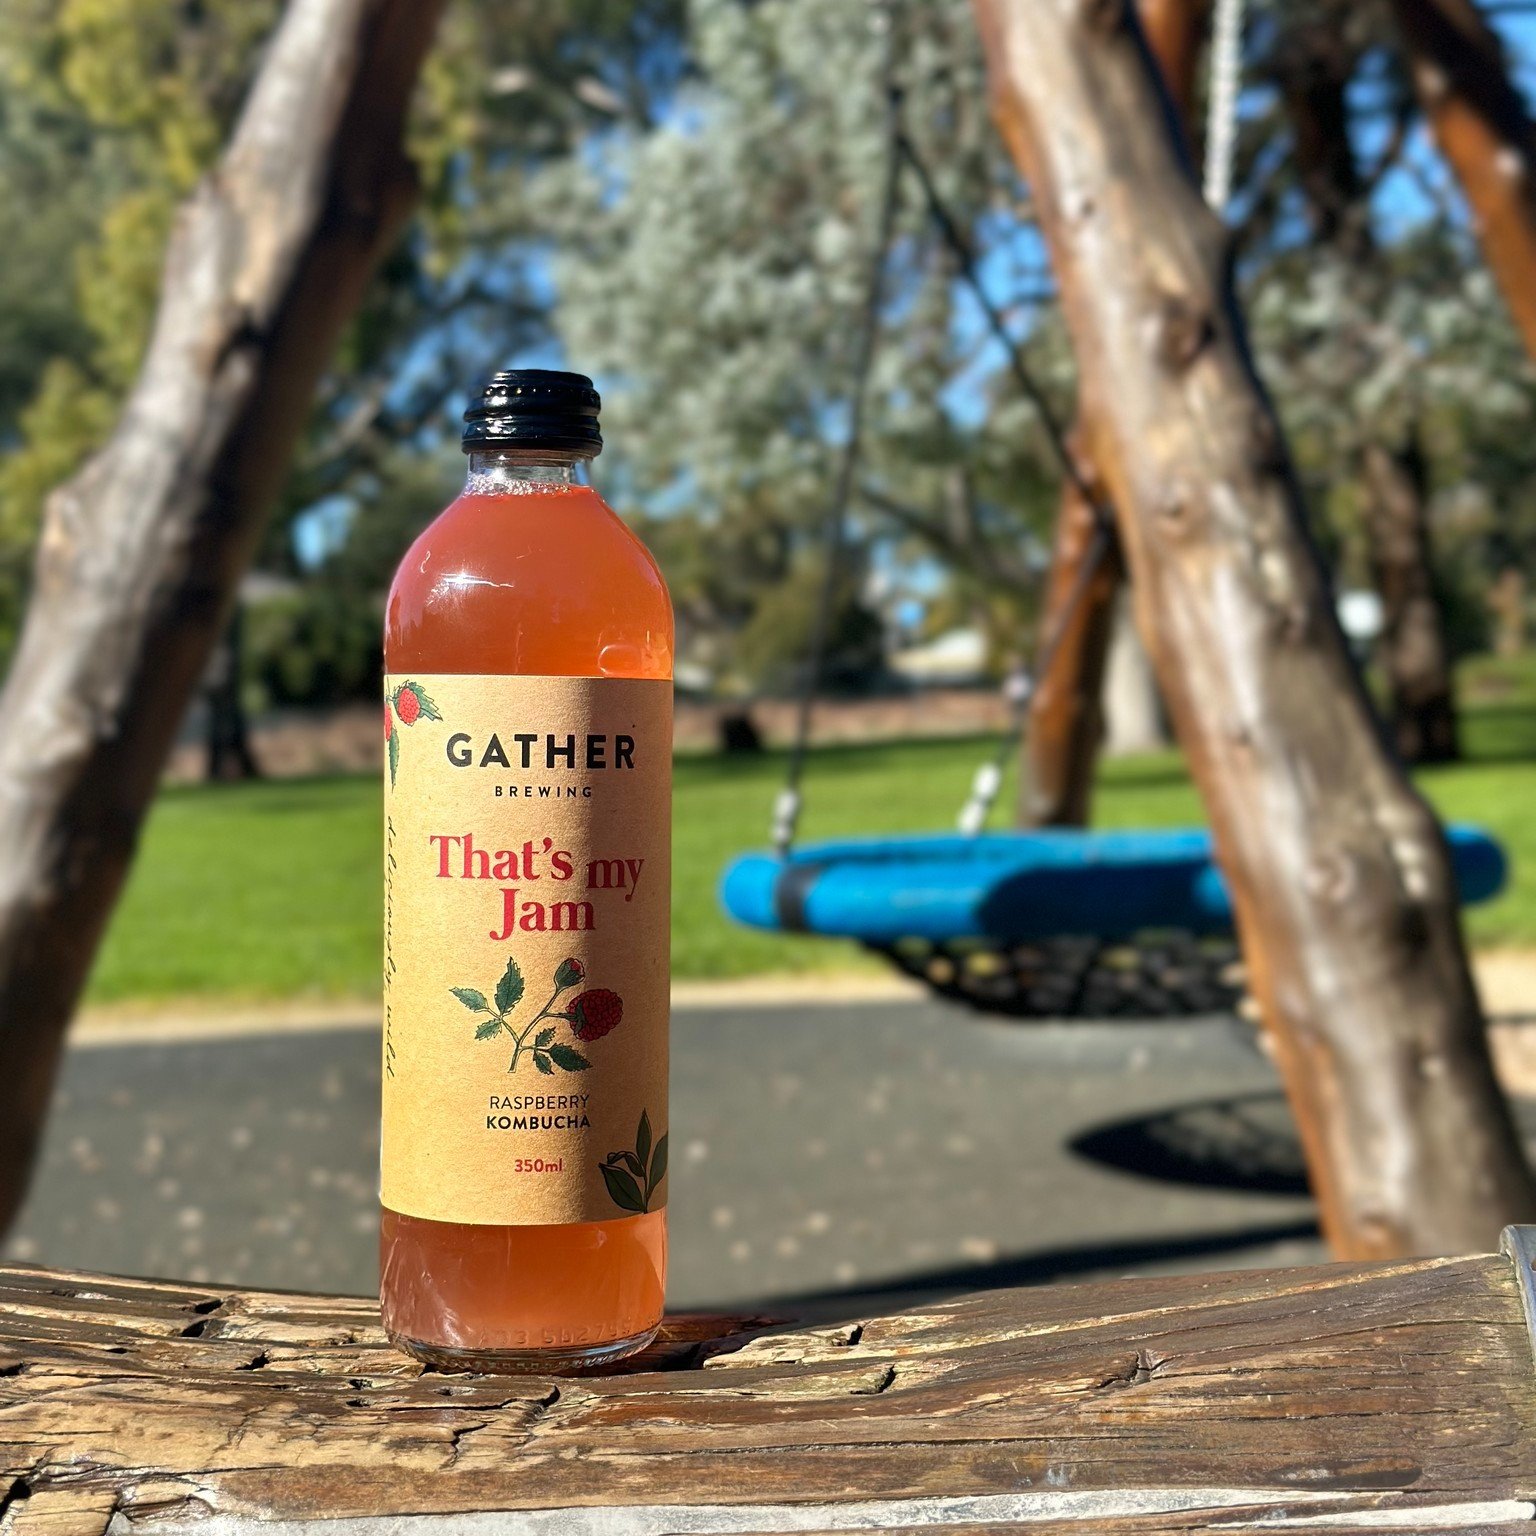 Come to the park with us 🛝🌞

Blue skies, kids having fun, kombucha in hand - Does it get any better?

#Kombucha #Park #ColdDrink